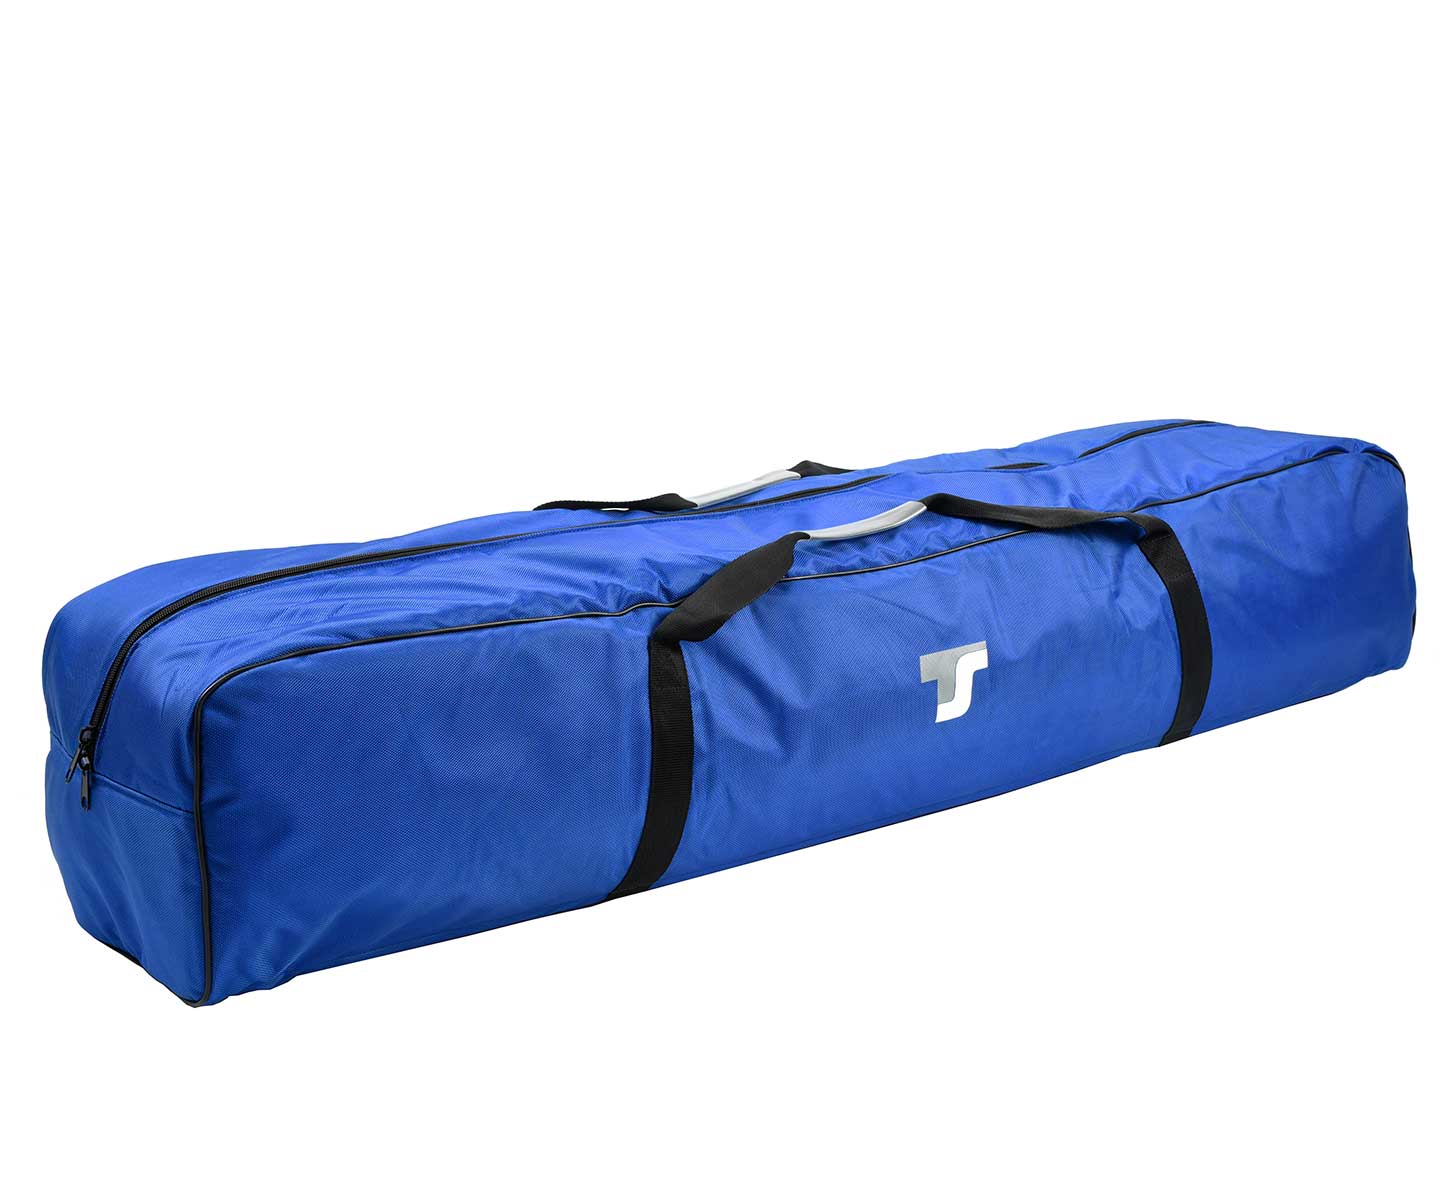    TS-Optics Carrying Bag with extra thick Padding - 132 cm  [EN]  